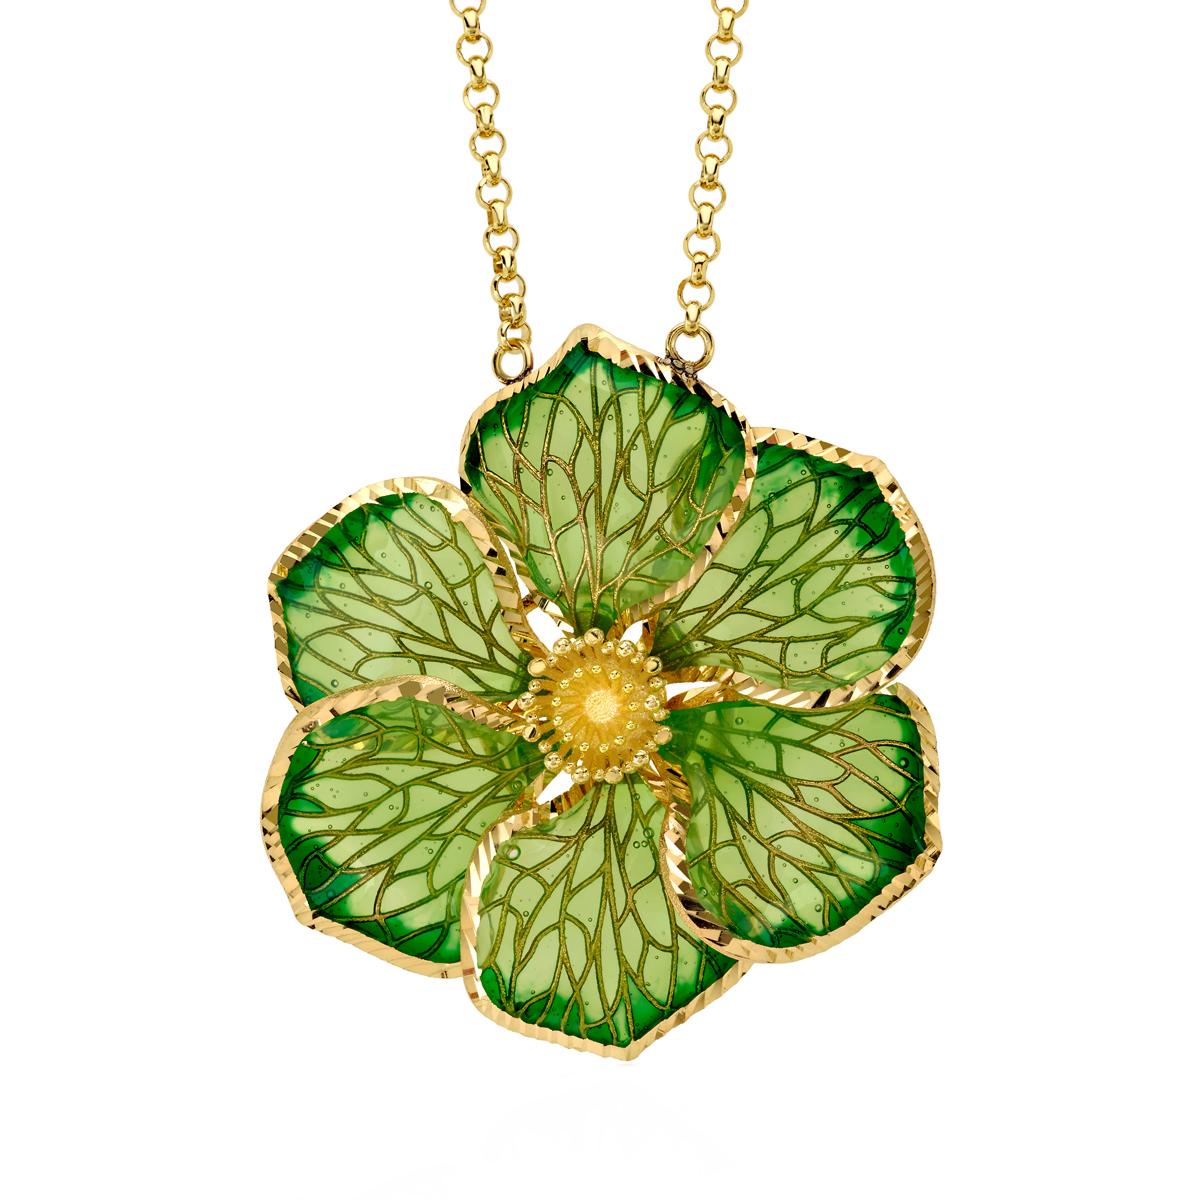 Silver enameled maple flower necklace